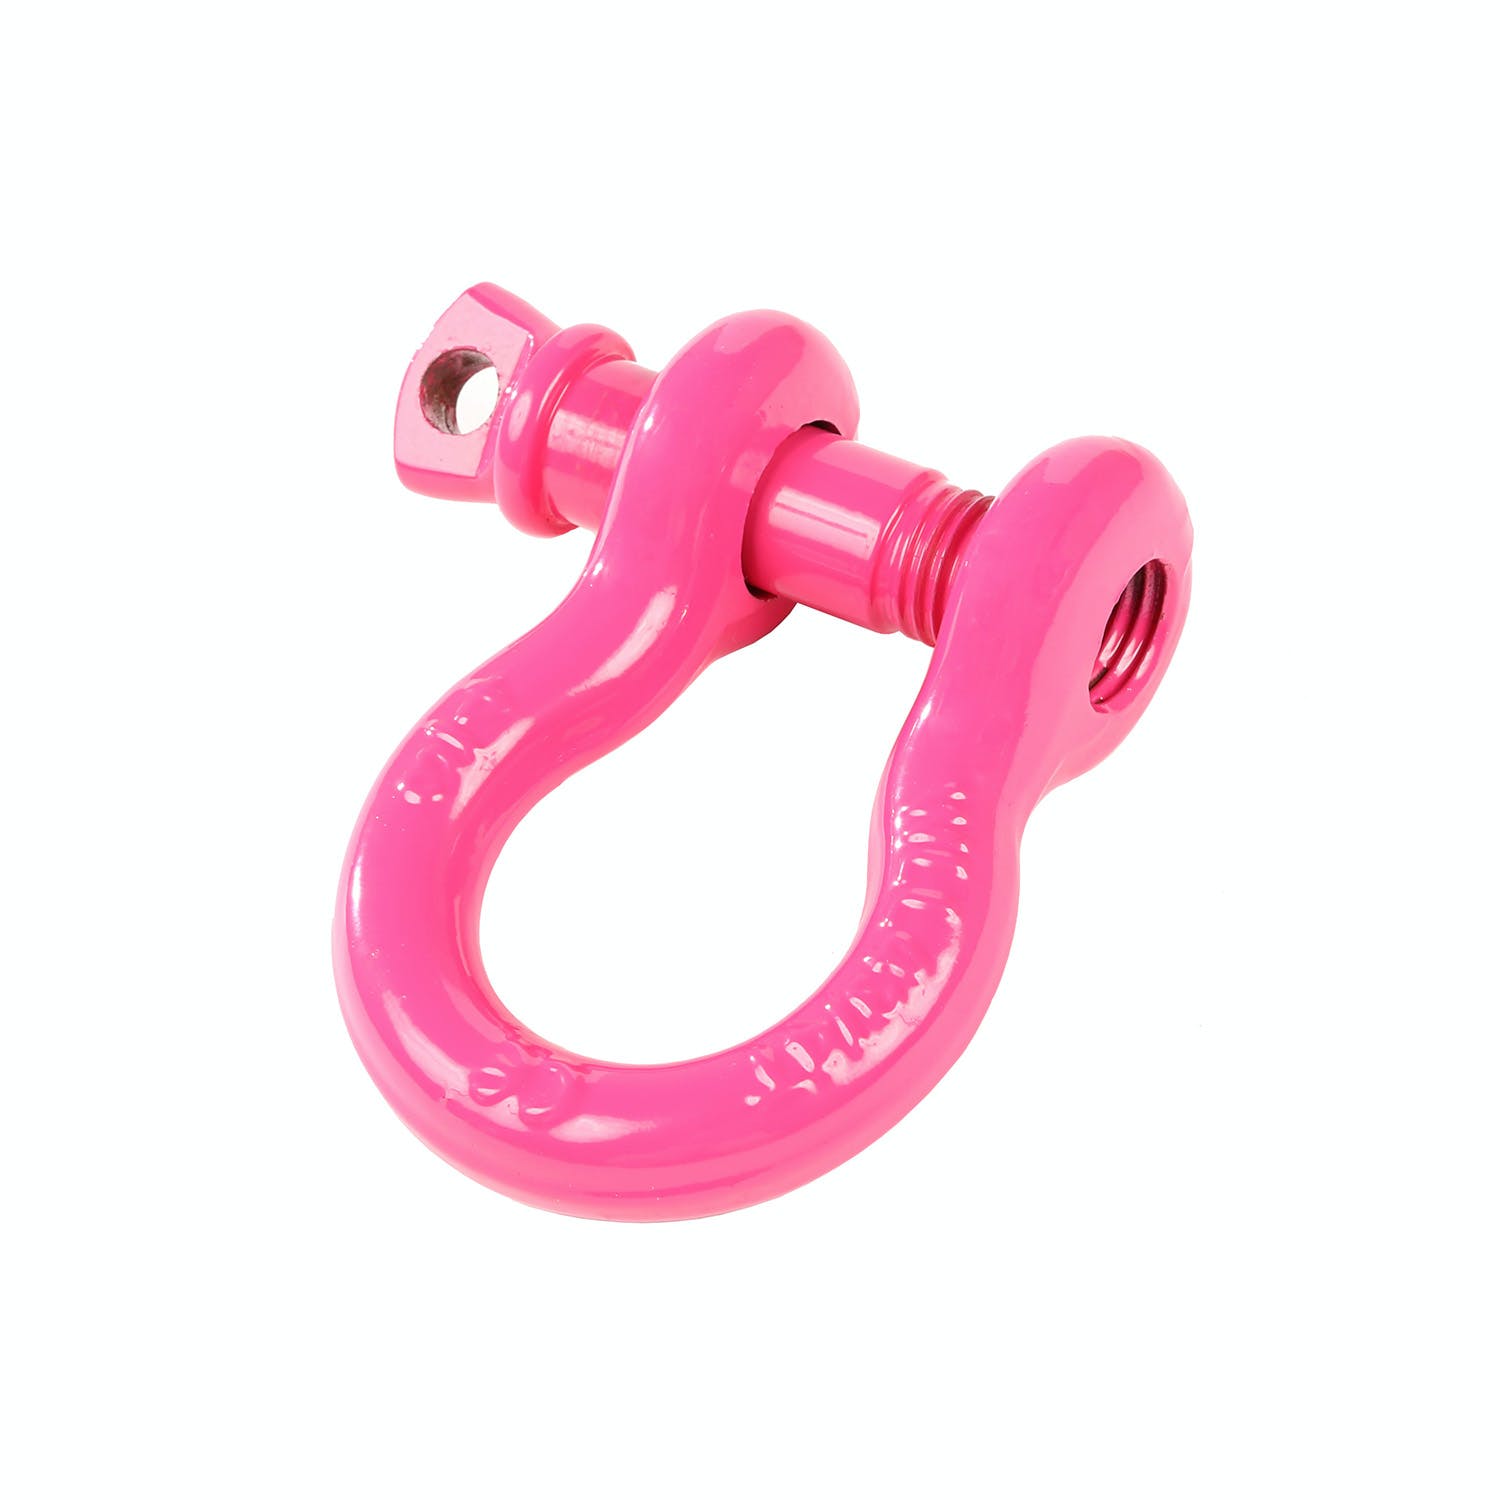 Rugged Ridge 11235.23 D-Shackle, 3/4-Inch, 9500 Pound, Pink